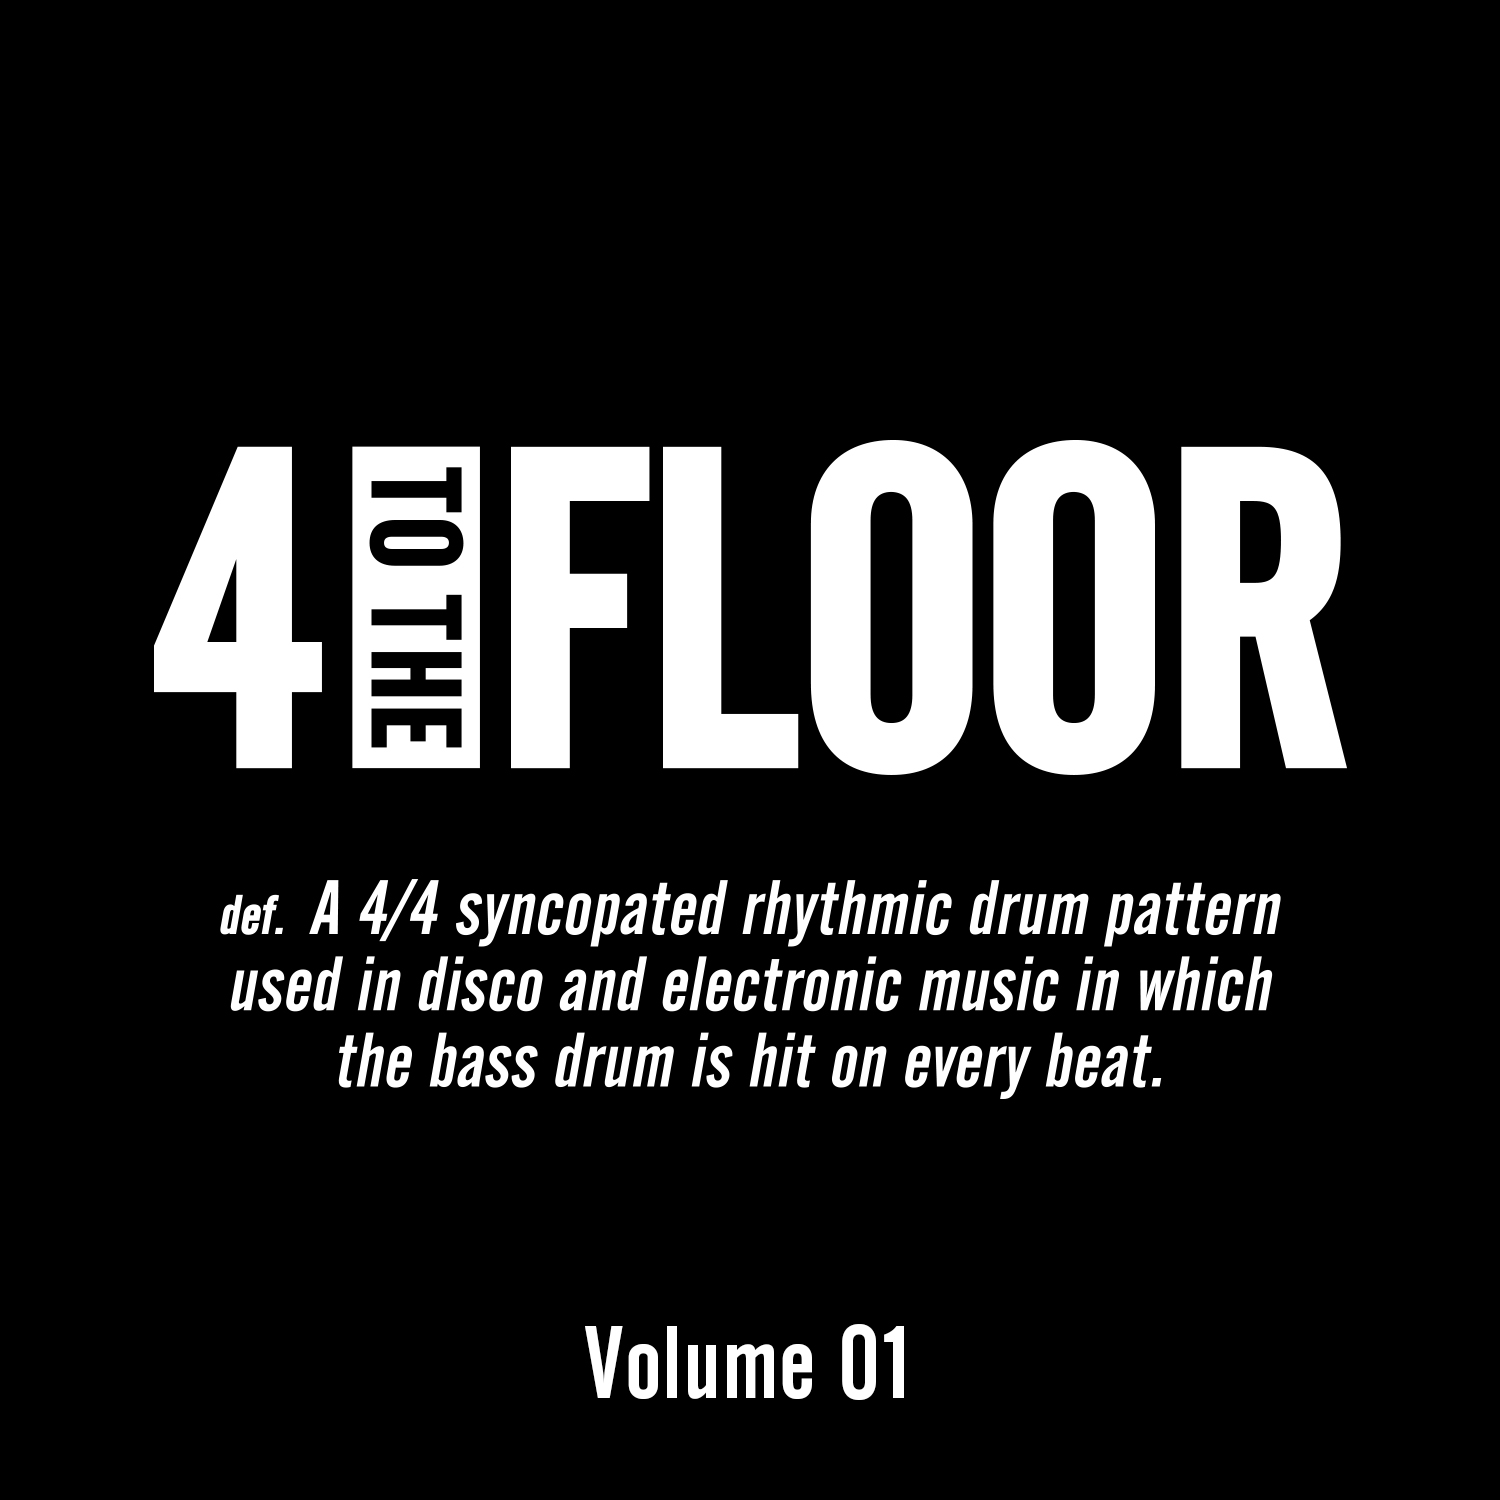 varm klud Gøre en indsats 4 To The Floor Volume 01 | Defected Records™ - House Music All Life Long